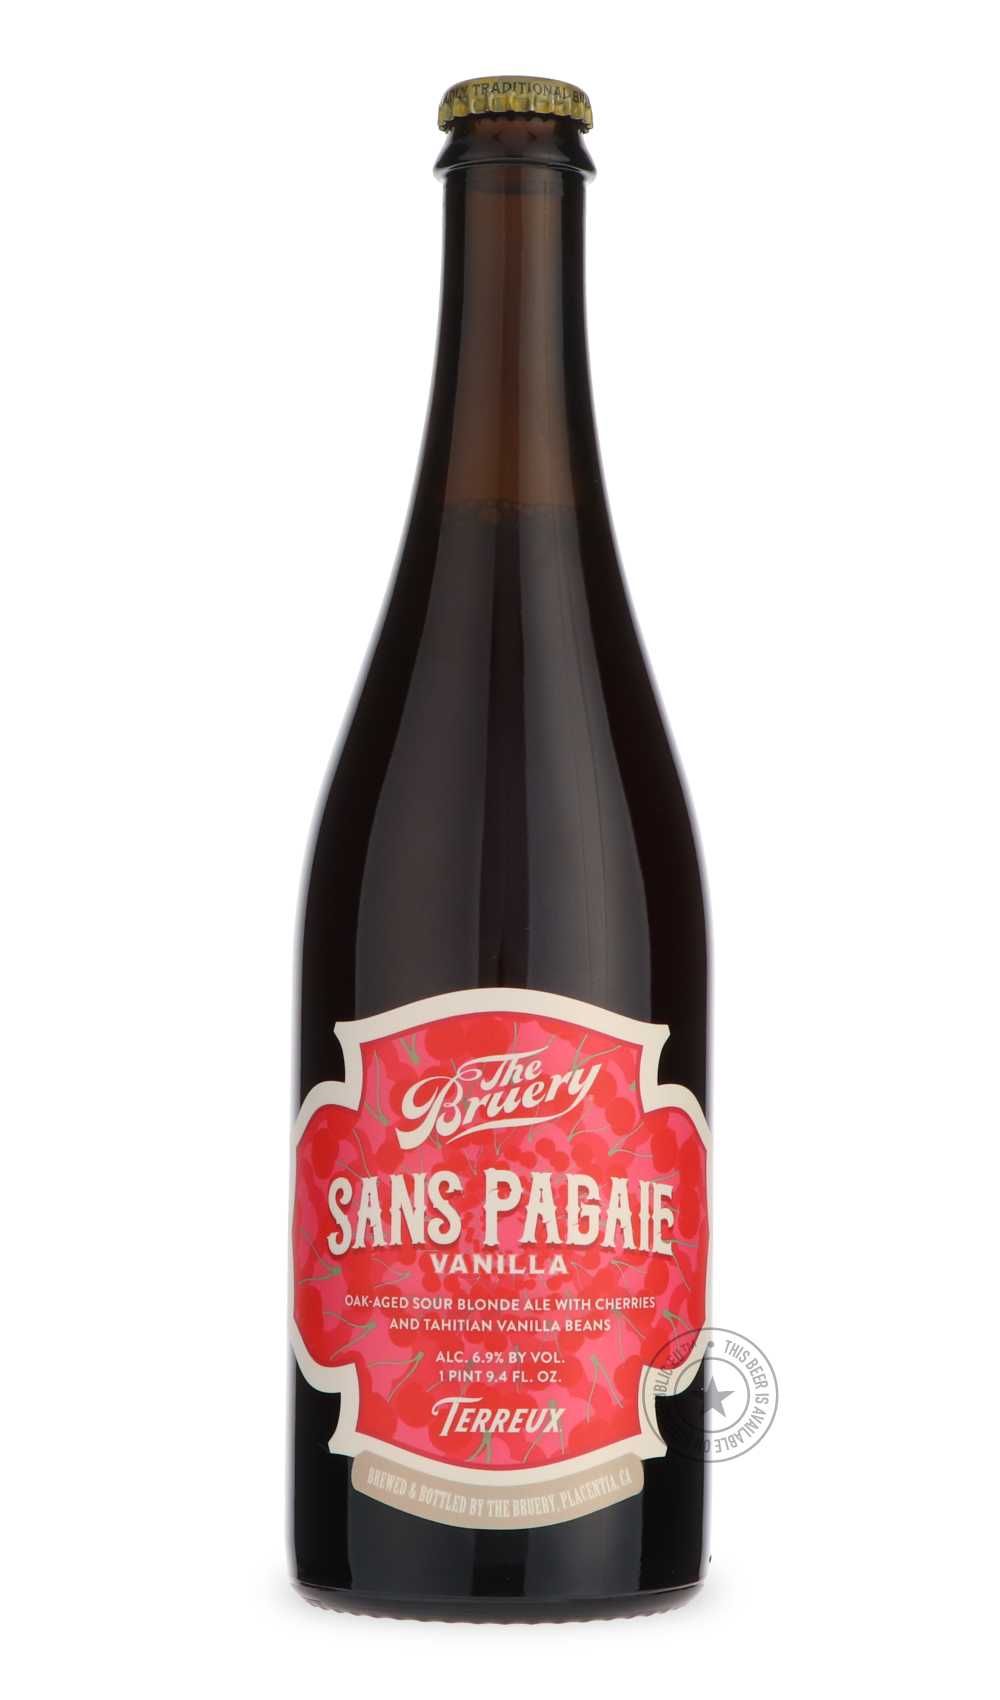 -The Bruery- Sans Pagaie With Vanilla-Sour / Wild & Fruity- Only @ Beer Republic - The best online beer store for American & Canadian craft beer - Buy beer online from the USA and Canada - Bier online kopen - Amerikaans bier kopen - Craft beer store - Craft beer kopen - Amerikanisch bier kaufen - Bier online kaufen - Acheter biere online - IPA - Stout - Porter - New England IPA - Hazy IPA - Imperial Stout - Barrel Aged - Barrel Aged Imperial Stout - Brown - Dark beer - Blond - Blonde - Pilsner - Lager - Whe